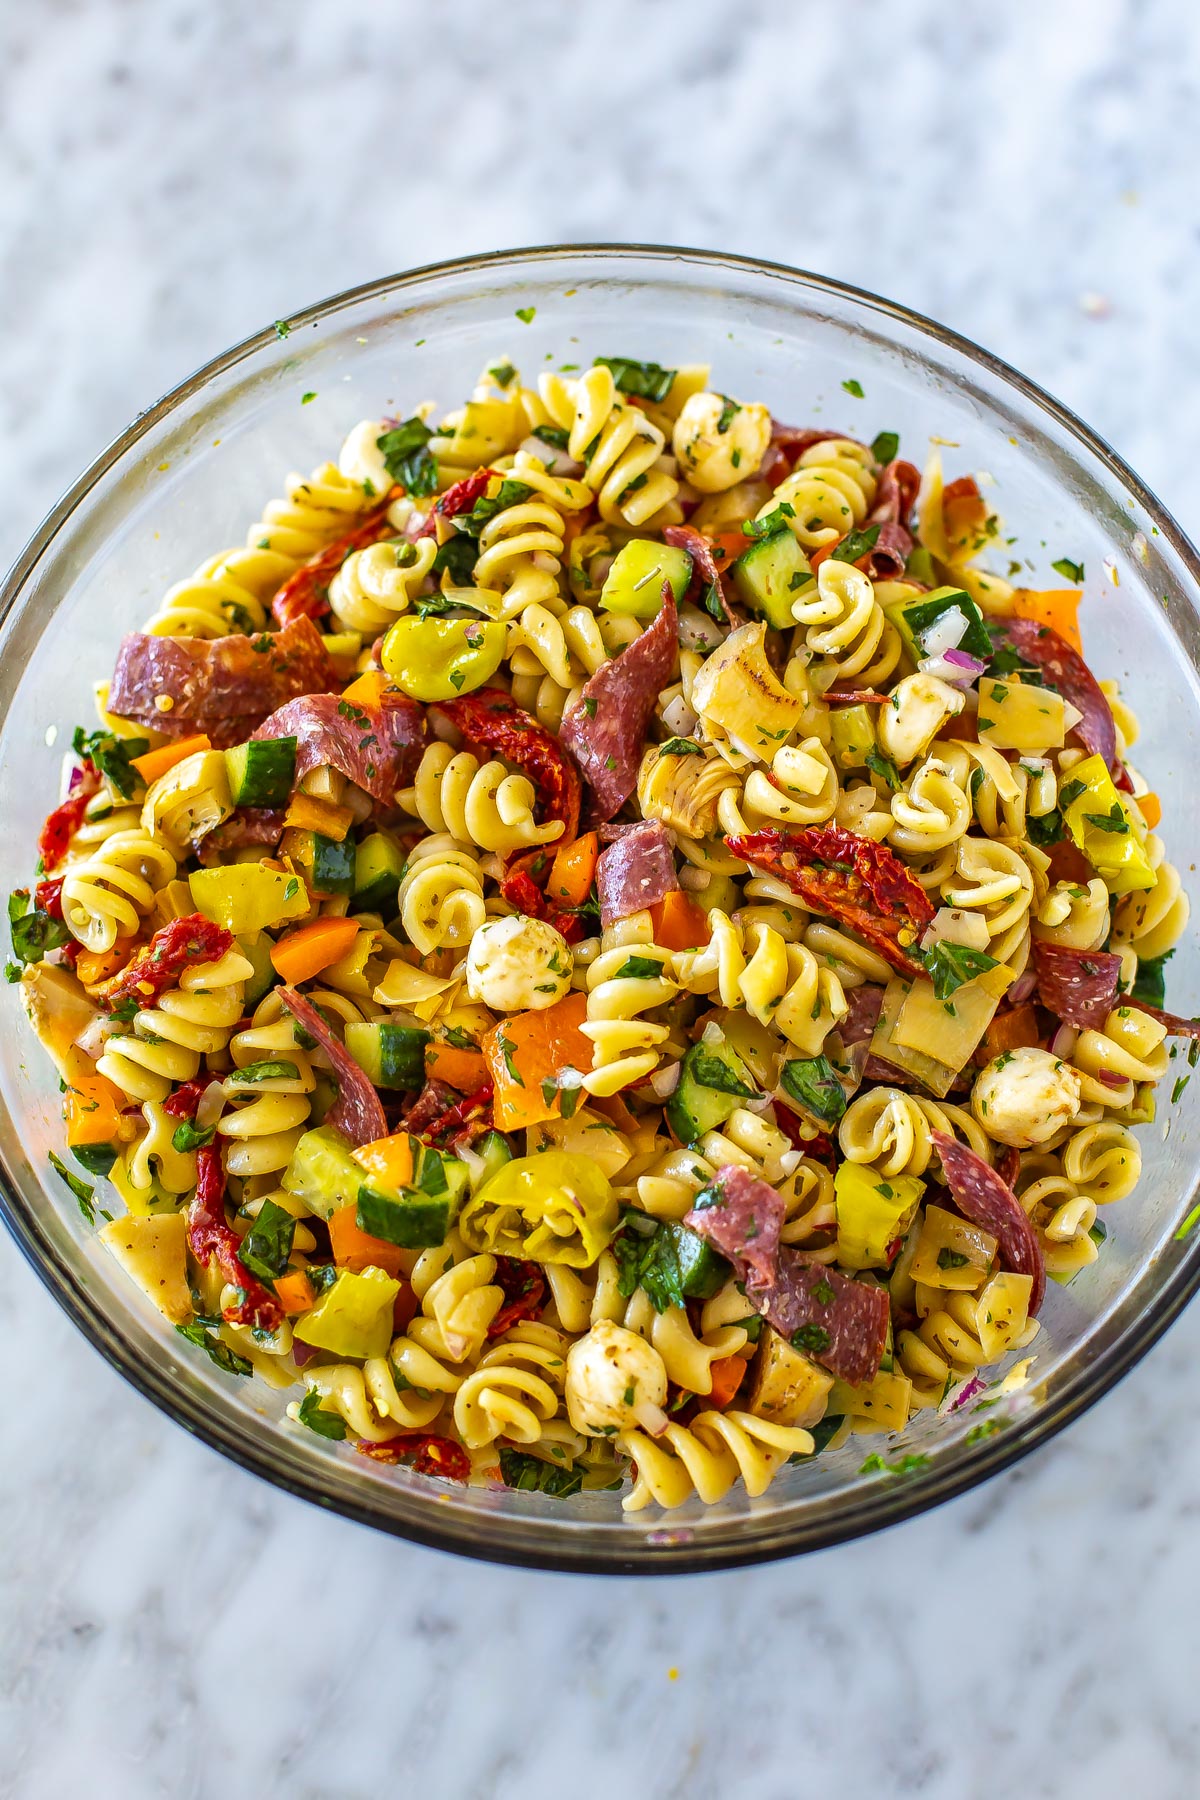 A big bowl filled with Italian pasta salad.